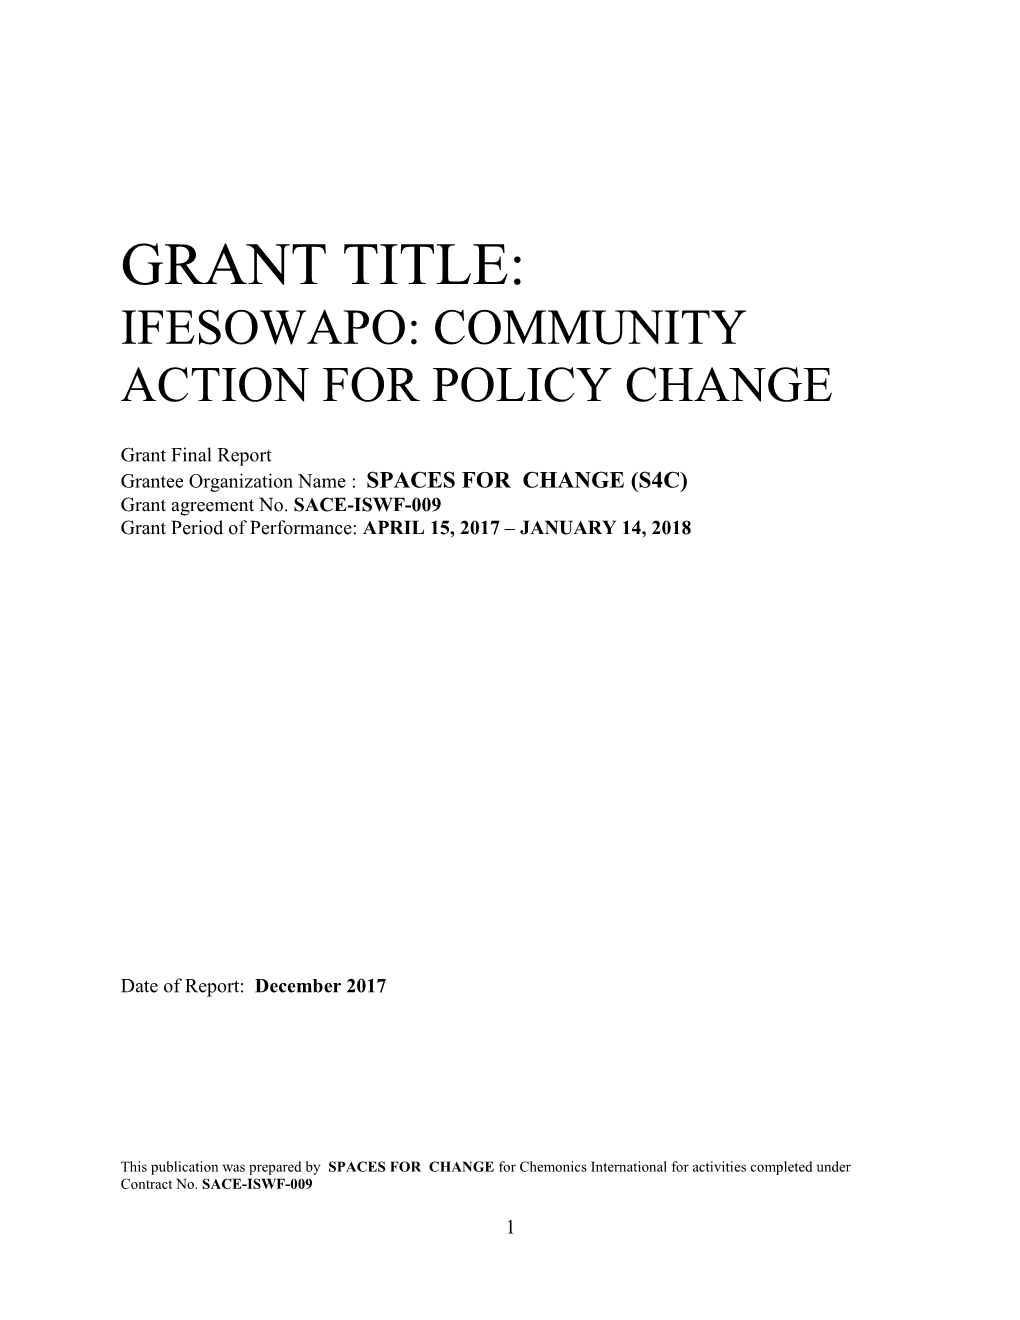 Grant Title: Ifesowapo: Community Action for Policy Change